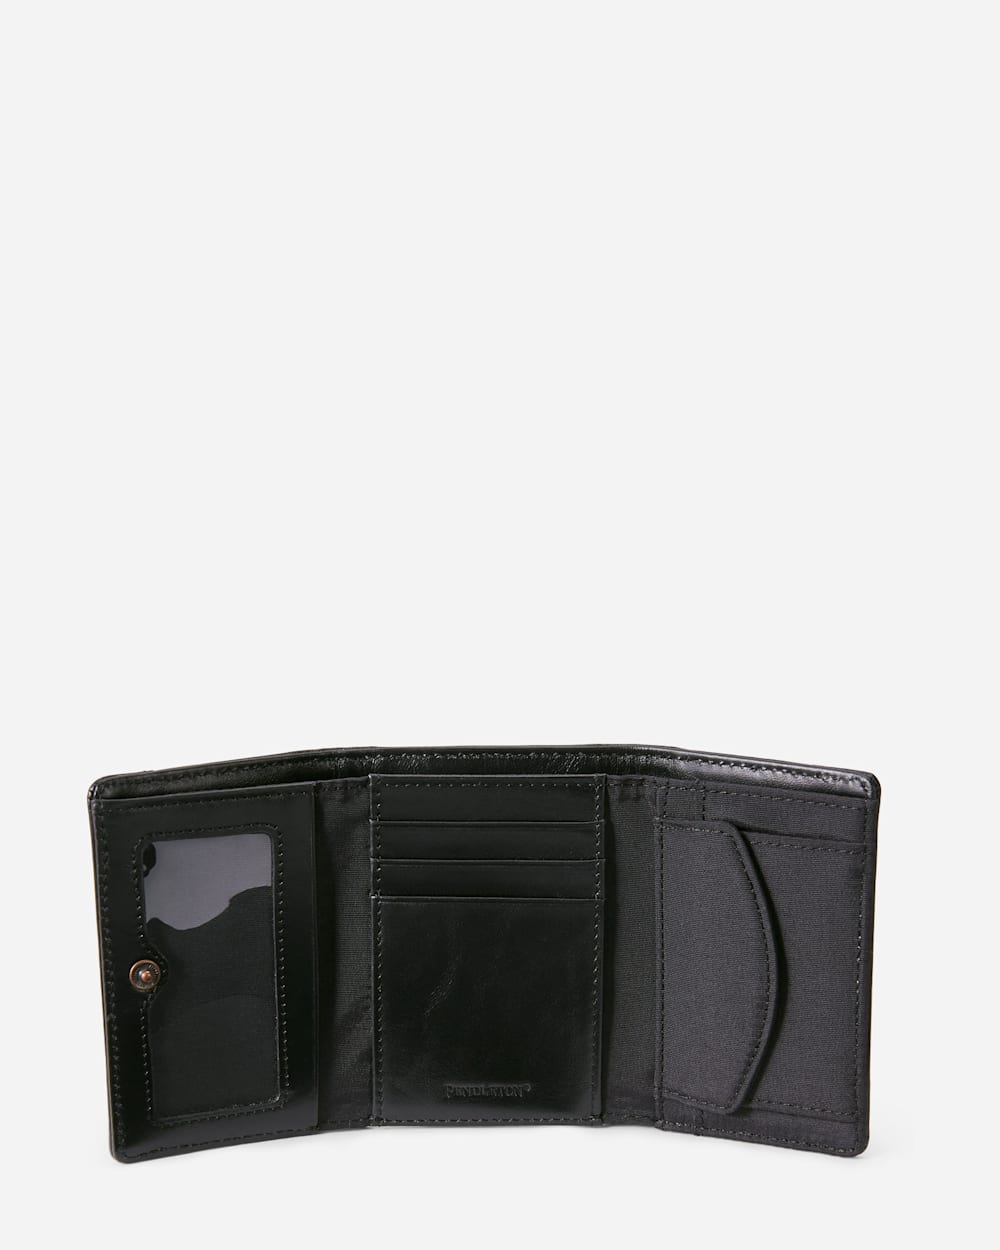 ALTERNATE VIEW OF SONORA TRIFOLD WALLET IN BLACK image number 2